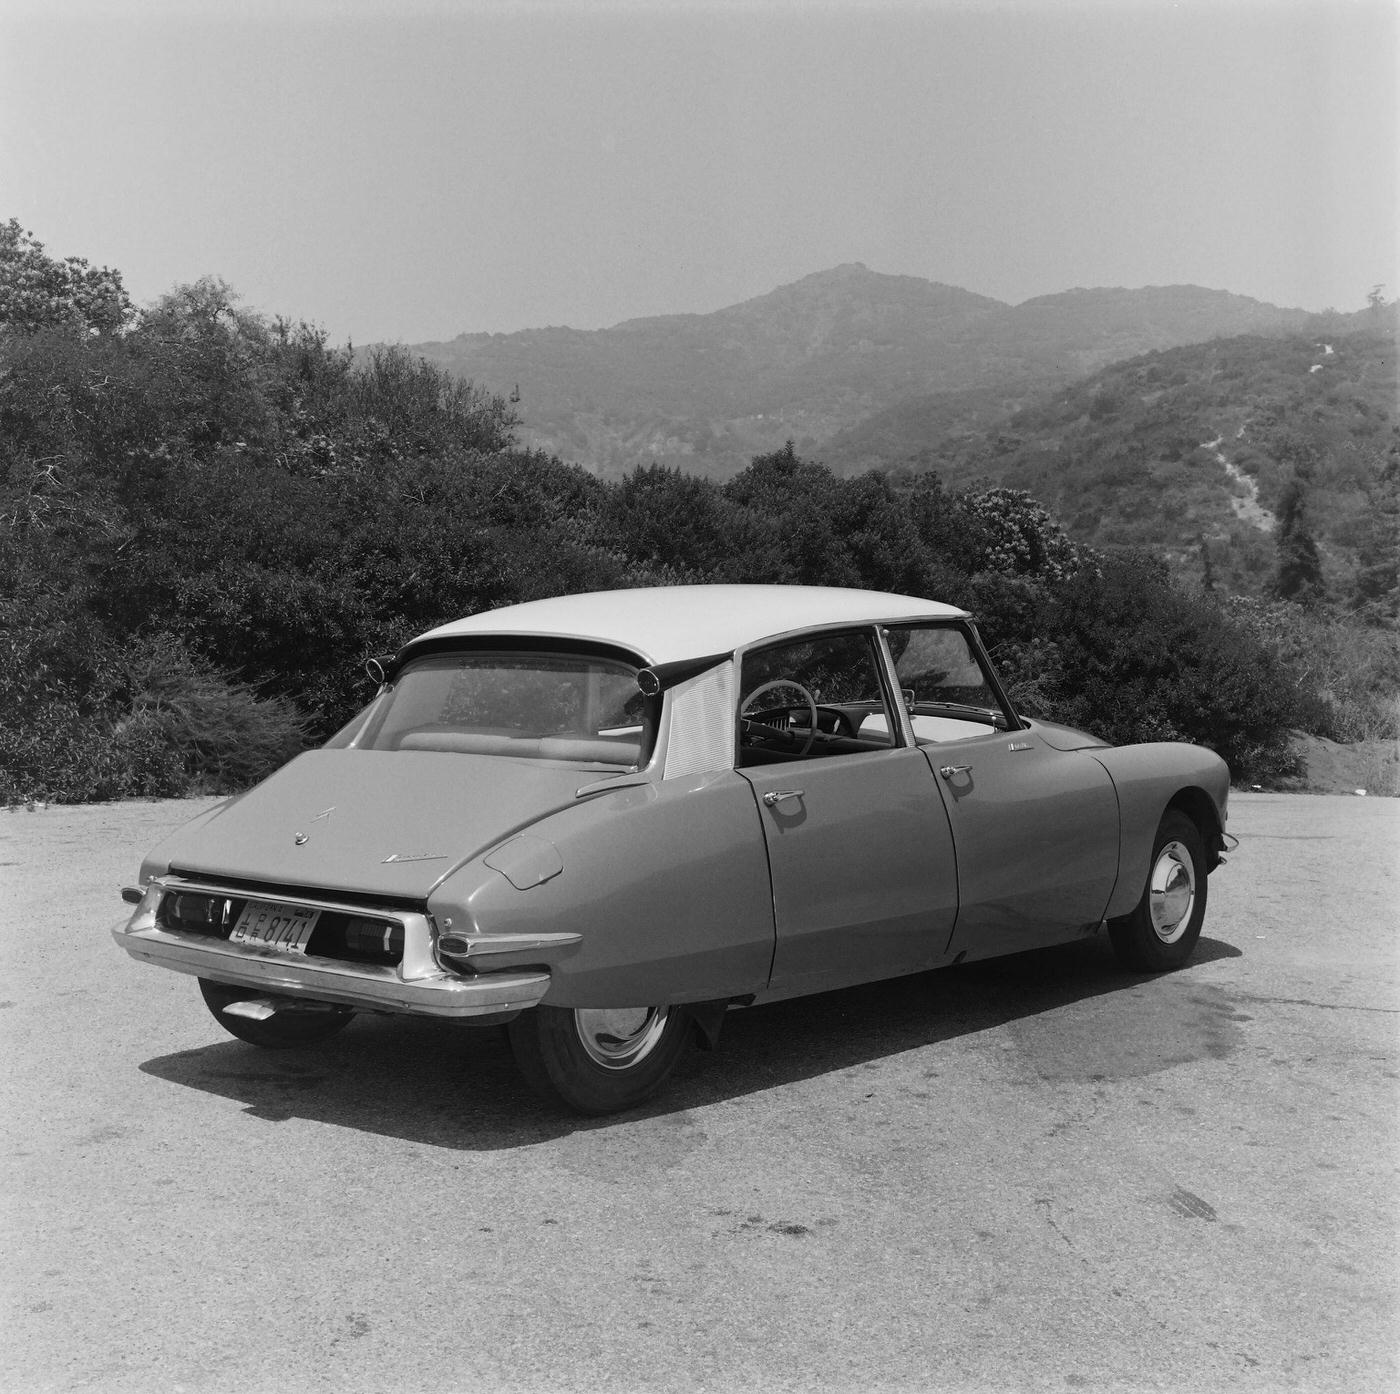 Road test of the 1956 Citroen DS19 in the United States, 1956